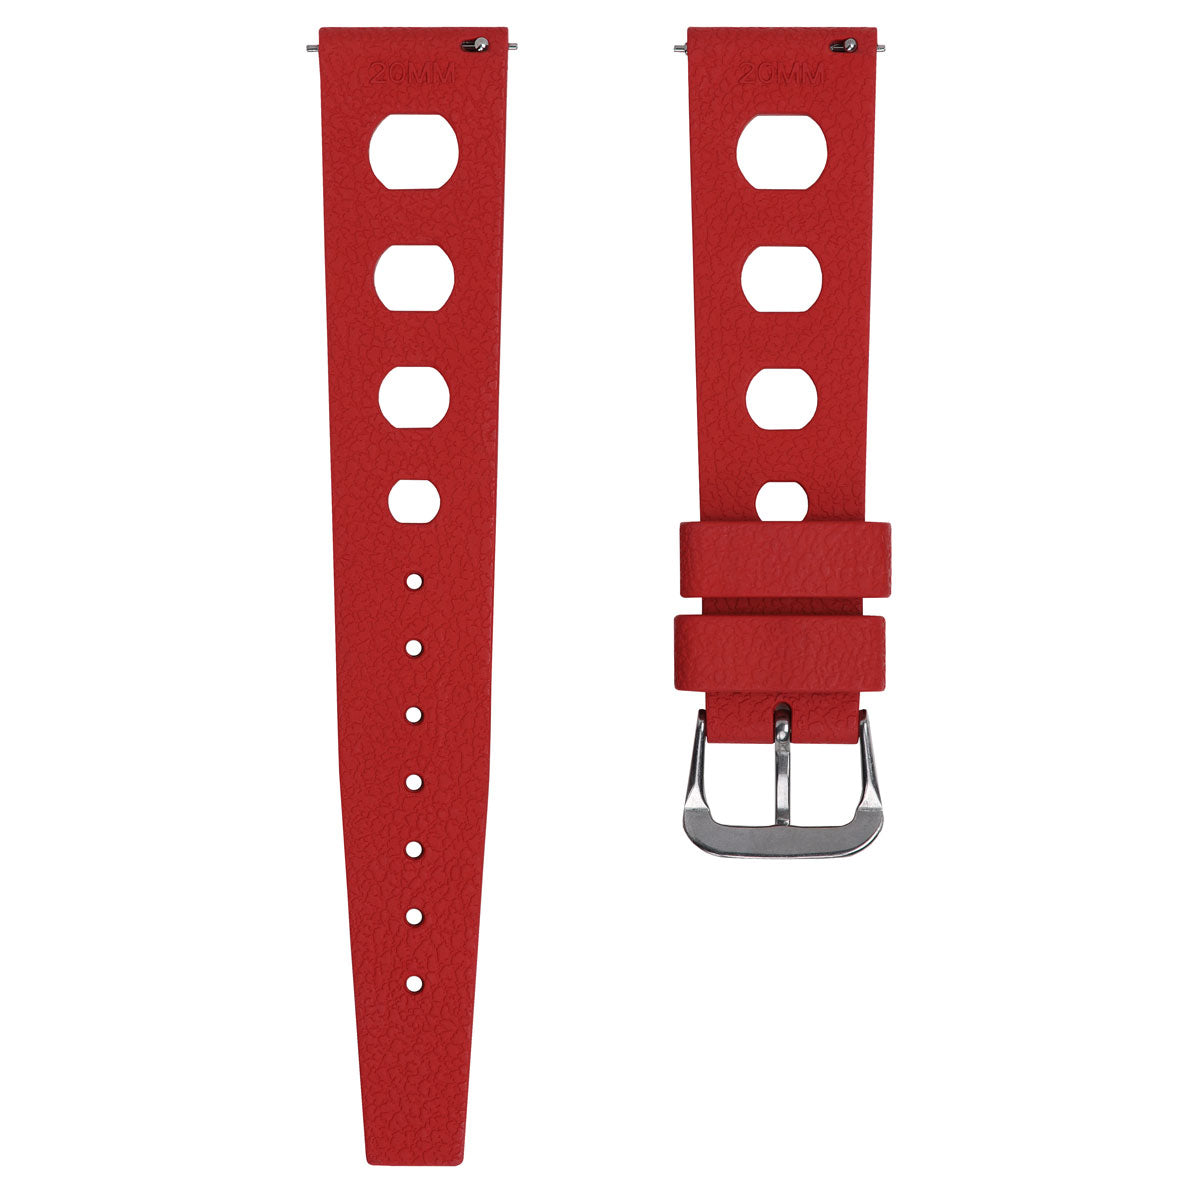 Watch Straps hand made in France  Free Global Shipping with UPS – Molequin